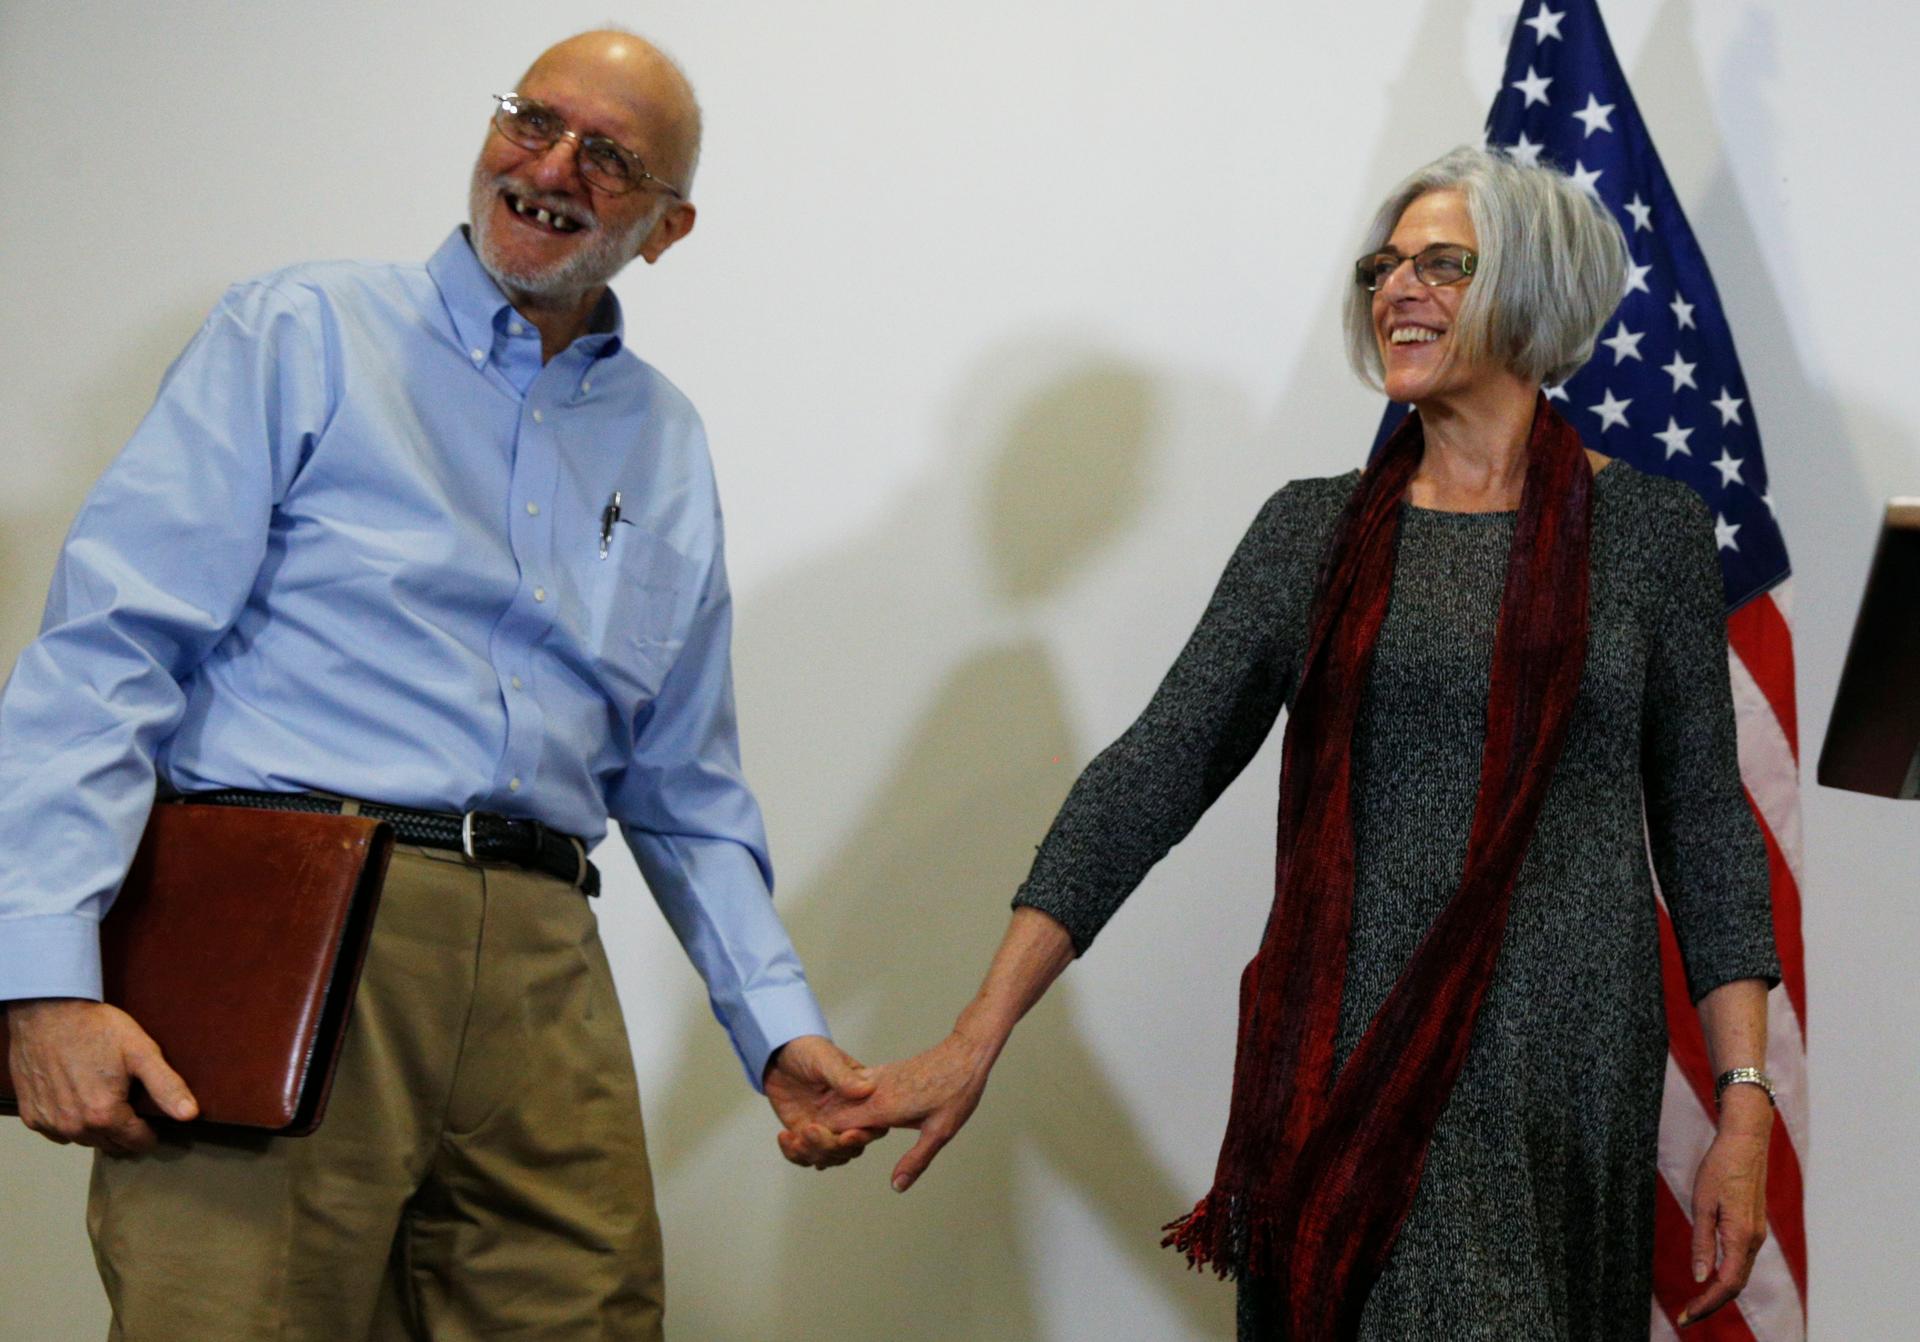 Released Cuban prisoner Alan Gross and his wife, Judy, are among guests invited by first lady Michelle Obama